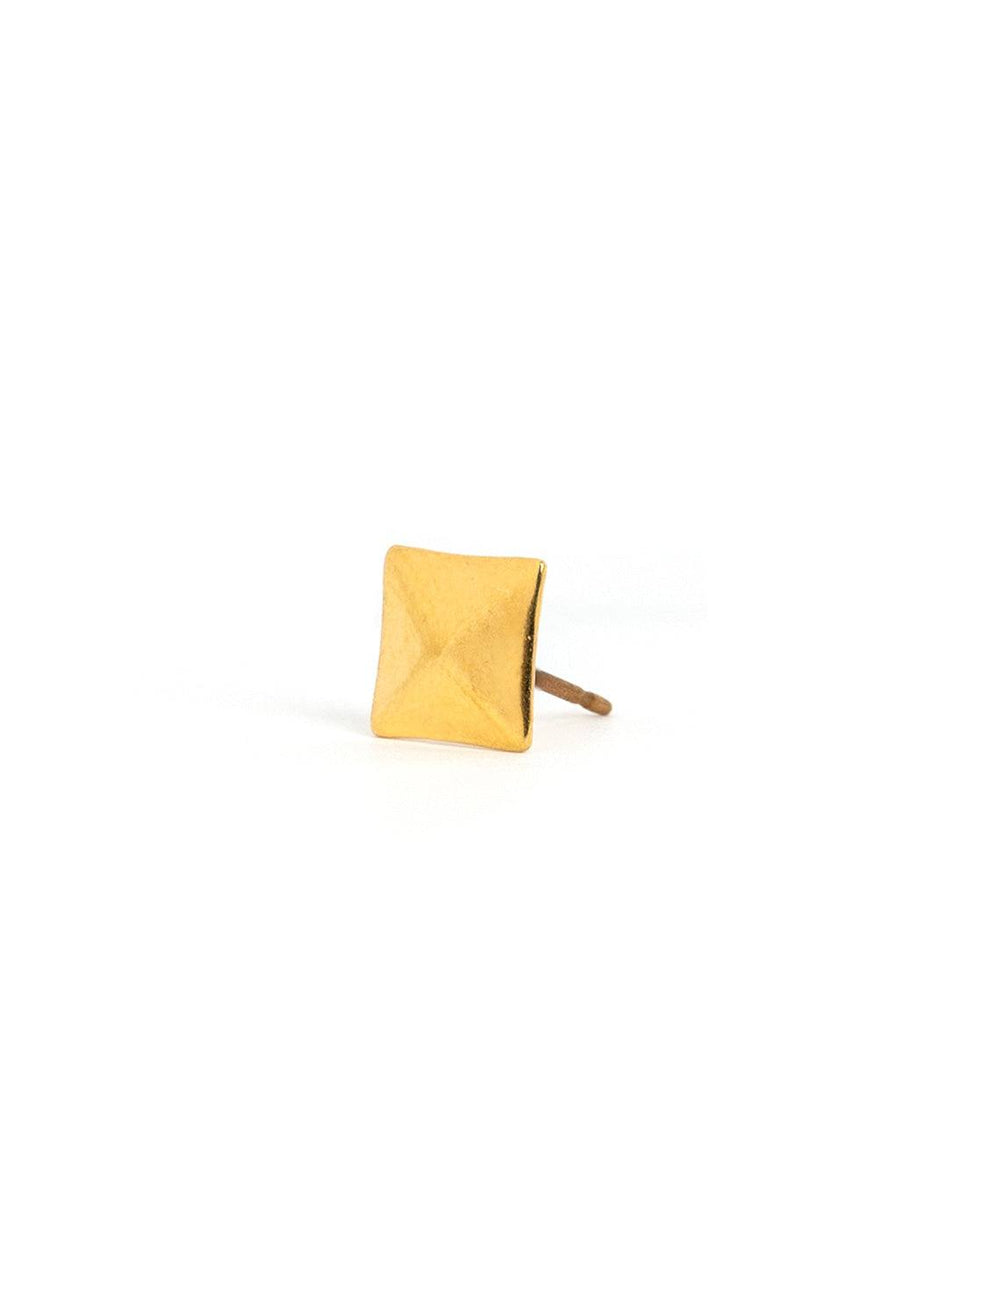 3/4 view of gold square studs